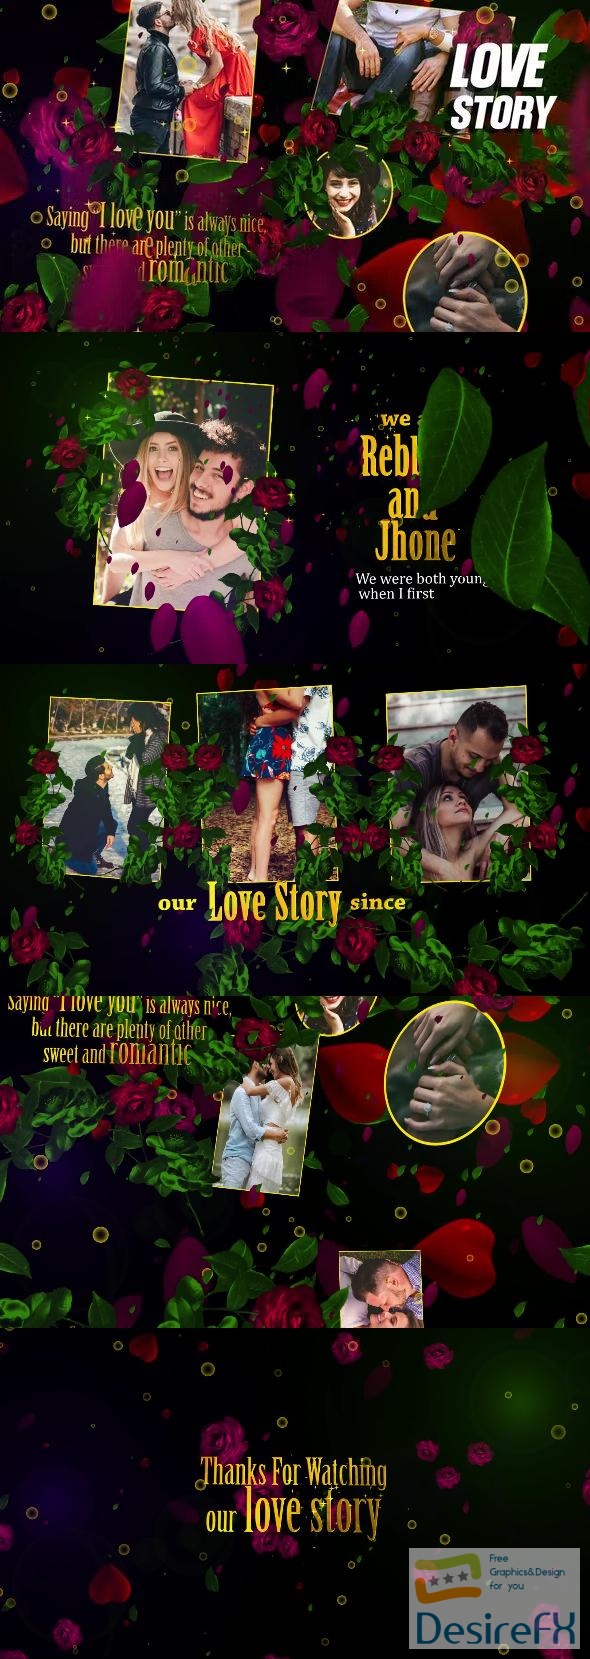 Videohive Intro - Love Story 36152959